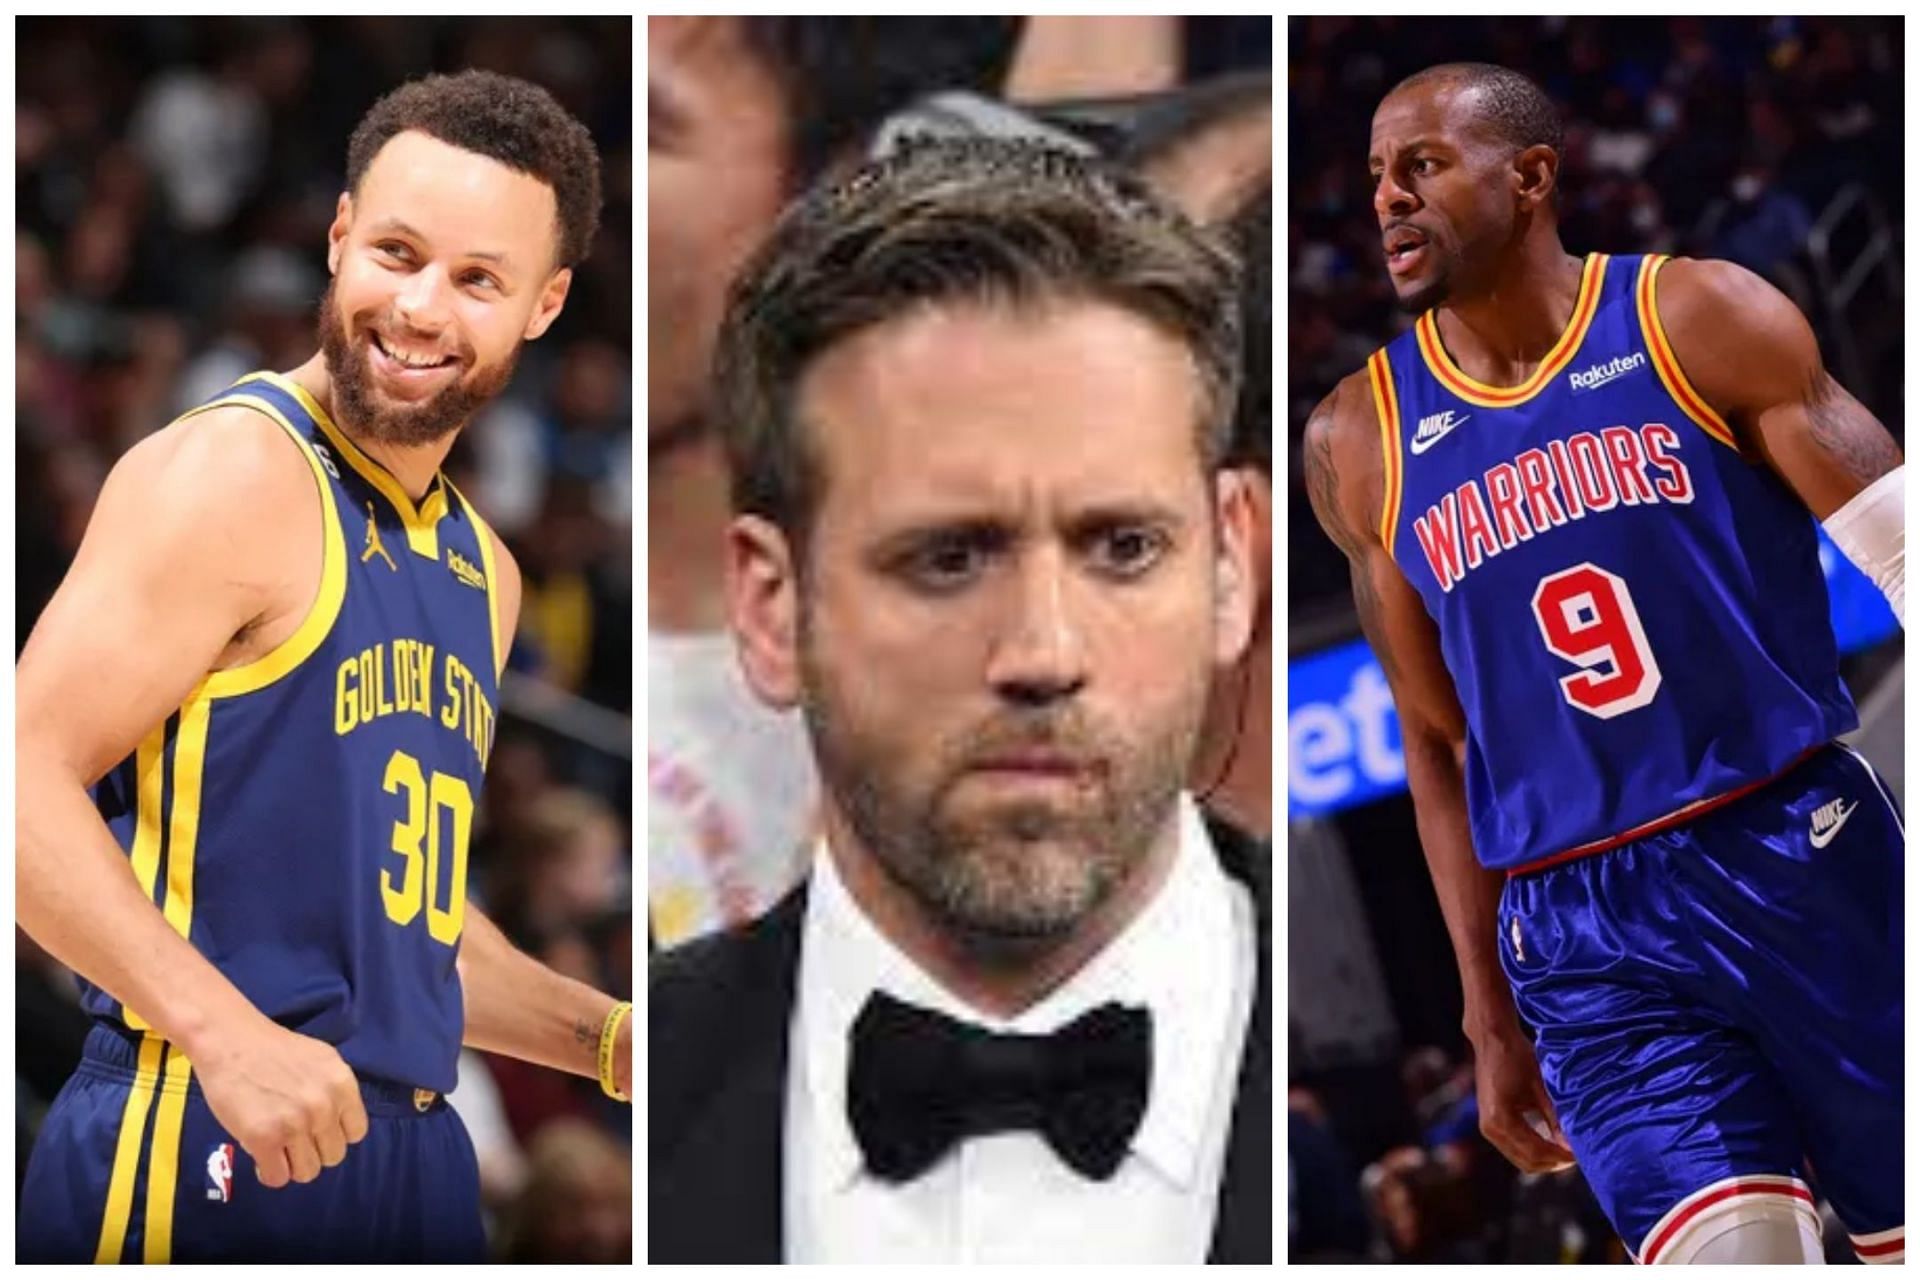 Former ESPN analyst Max Kellerman once explained why he would pick Andre Iguodala (right) to take the last shot instead of Steph Curry (left)